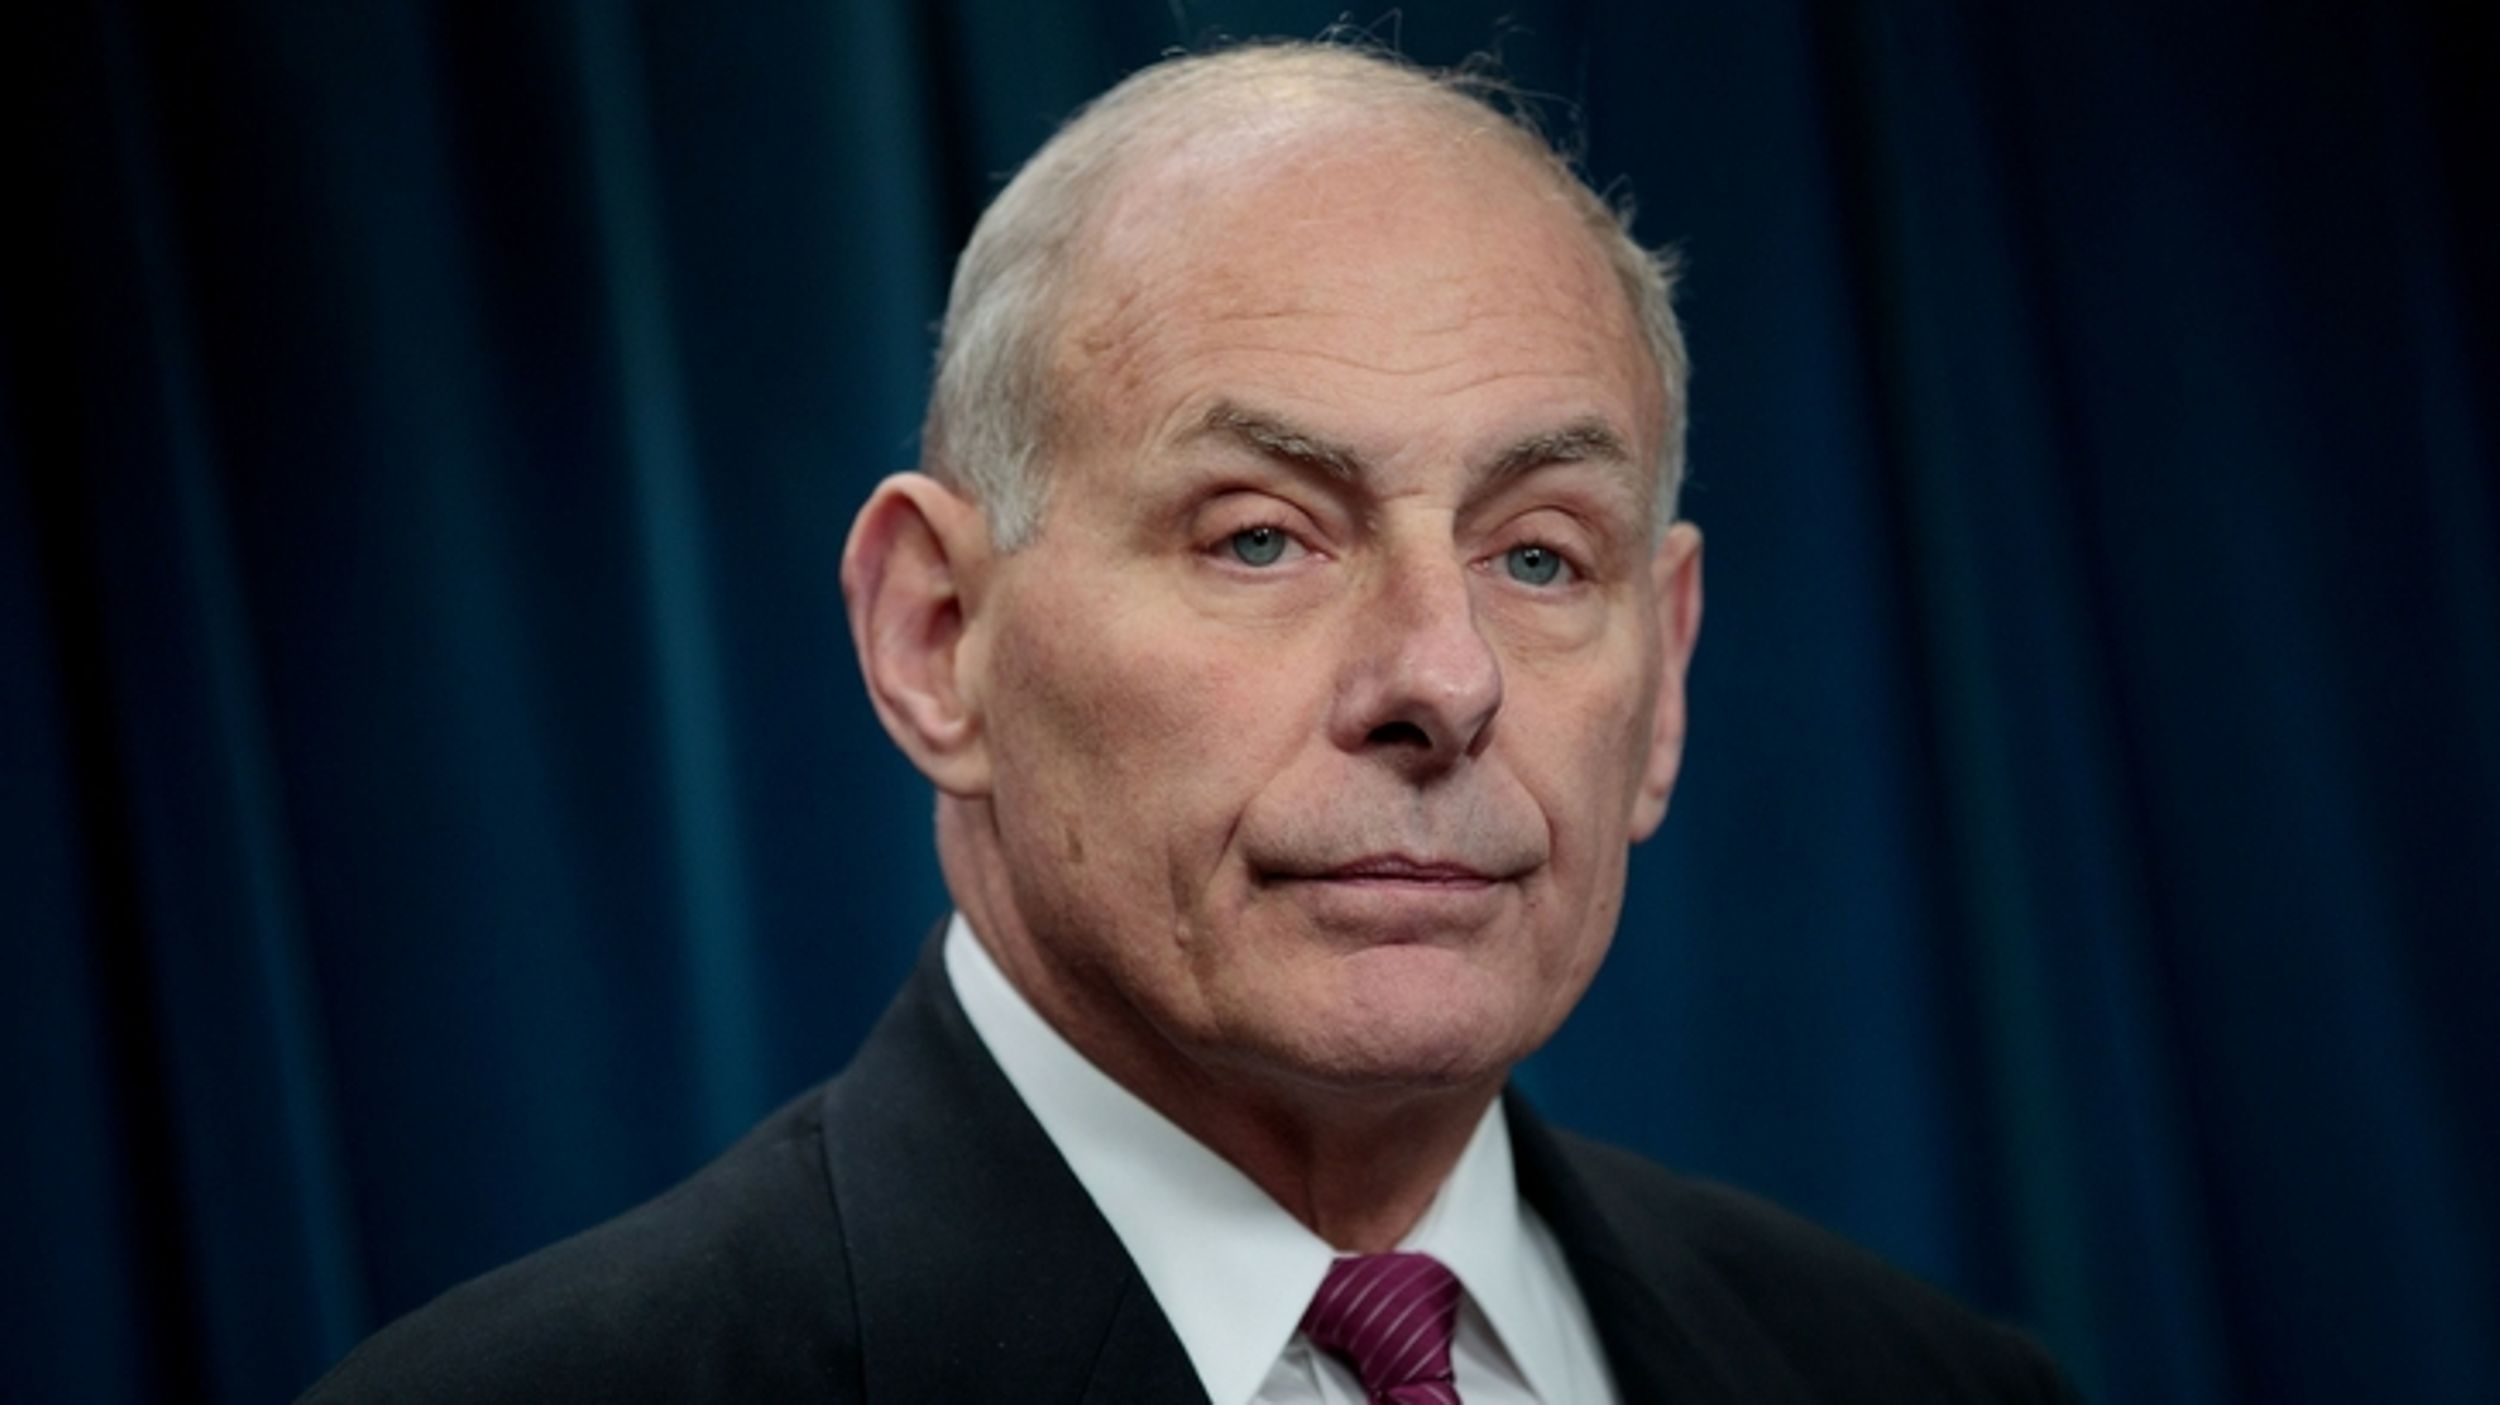 WATCH: John Kelly Makes Inflammatory Comments About Civil War